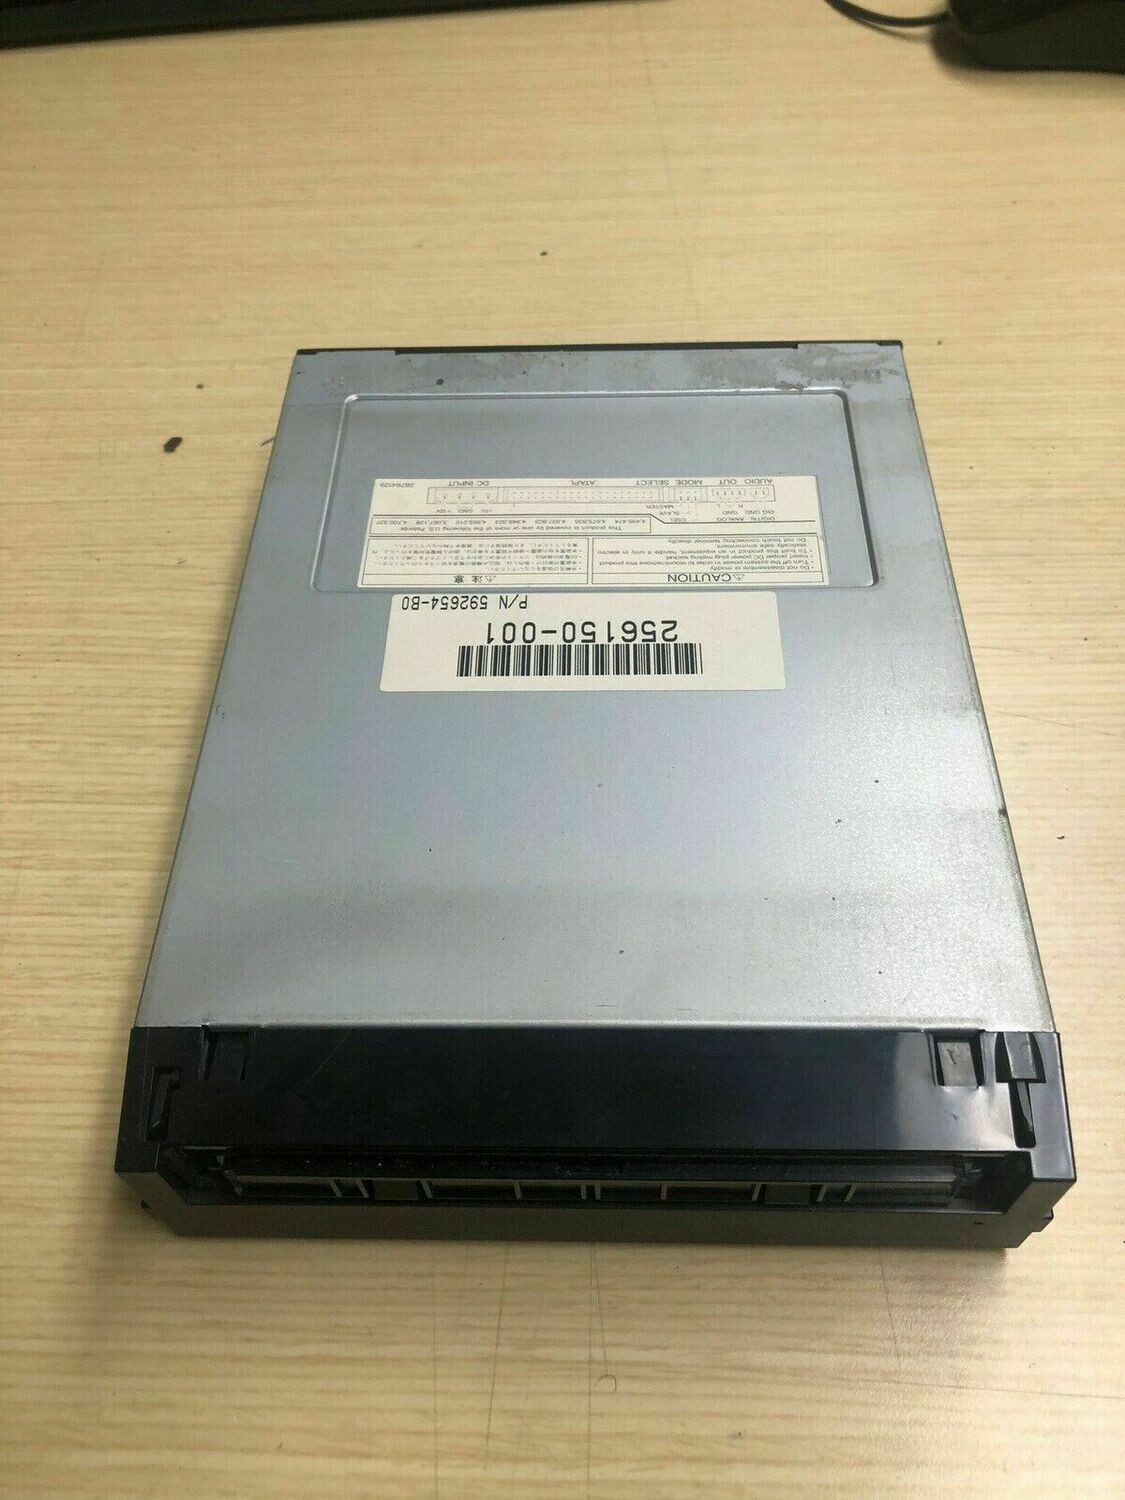 Replacement DVD Drive Part For Bose  For Bose 321 Series I II III